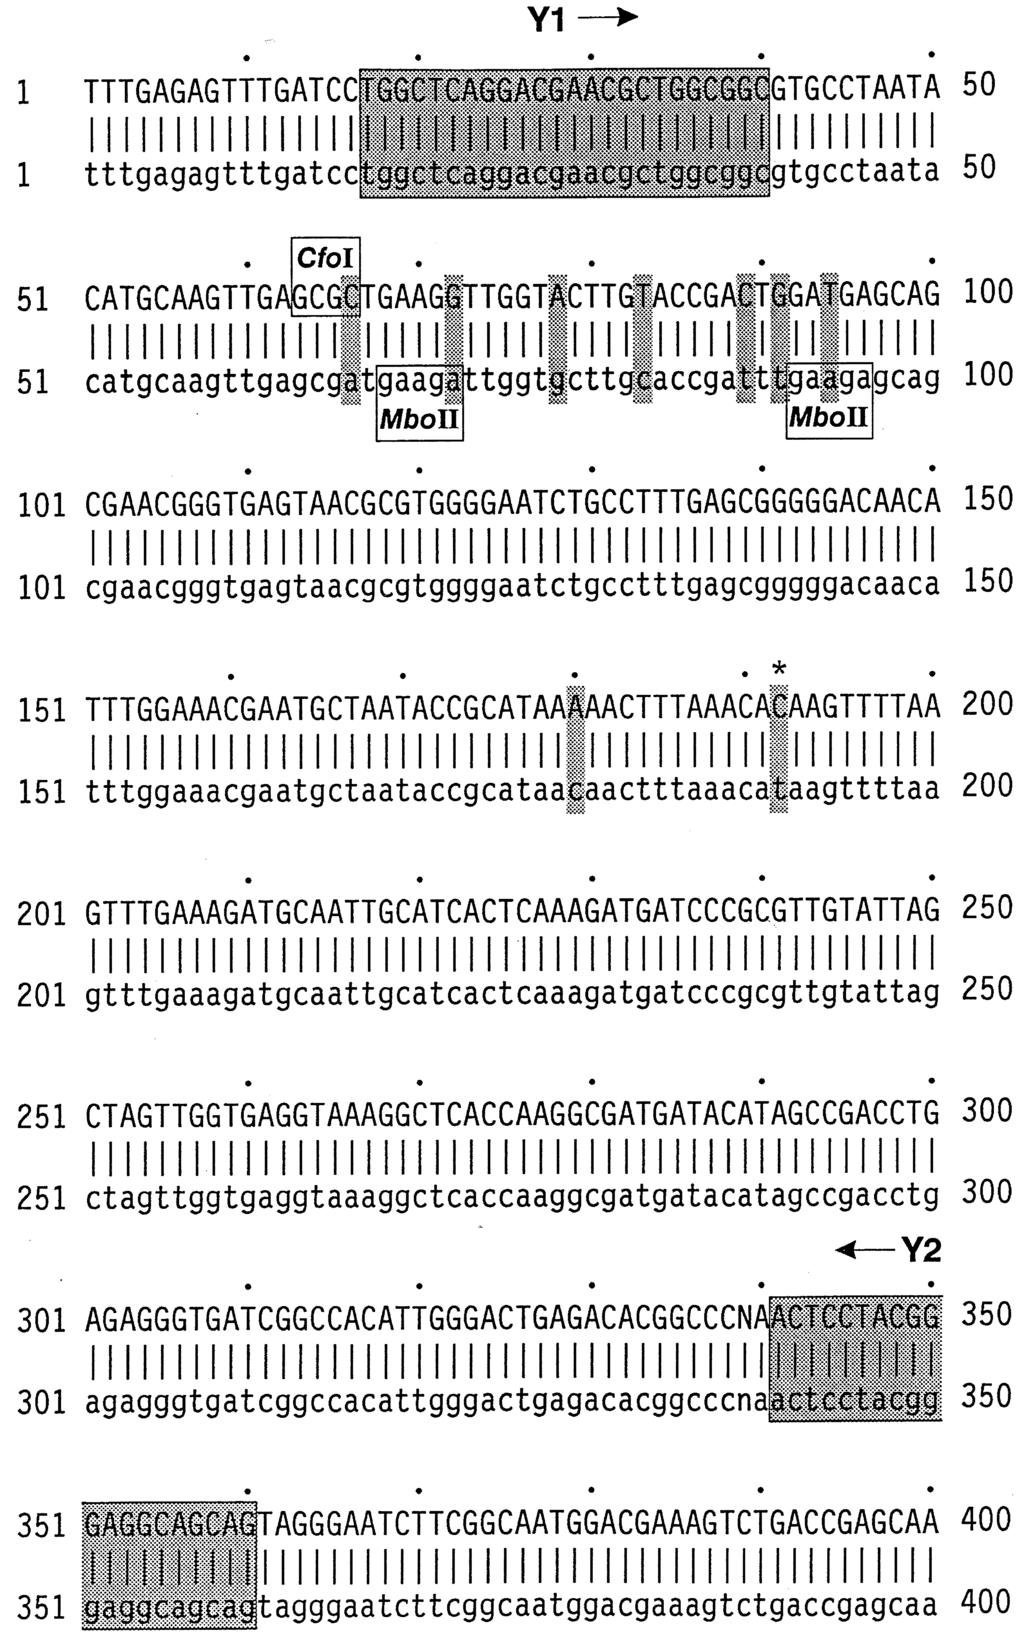 L.J.H. Ward et al. / FEMS Microbiology Letters 166 (1998) 15^20 17 Fig. 2. Partial DNA sequences of the 16S ribosomal RNA genes from L. lactis ssp. lactis (upper case) and L.